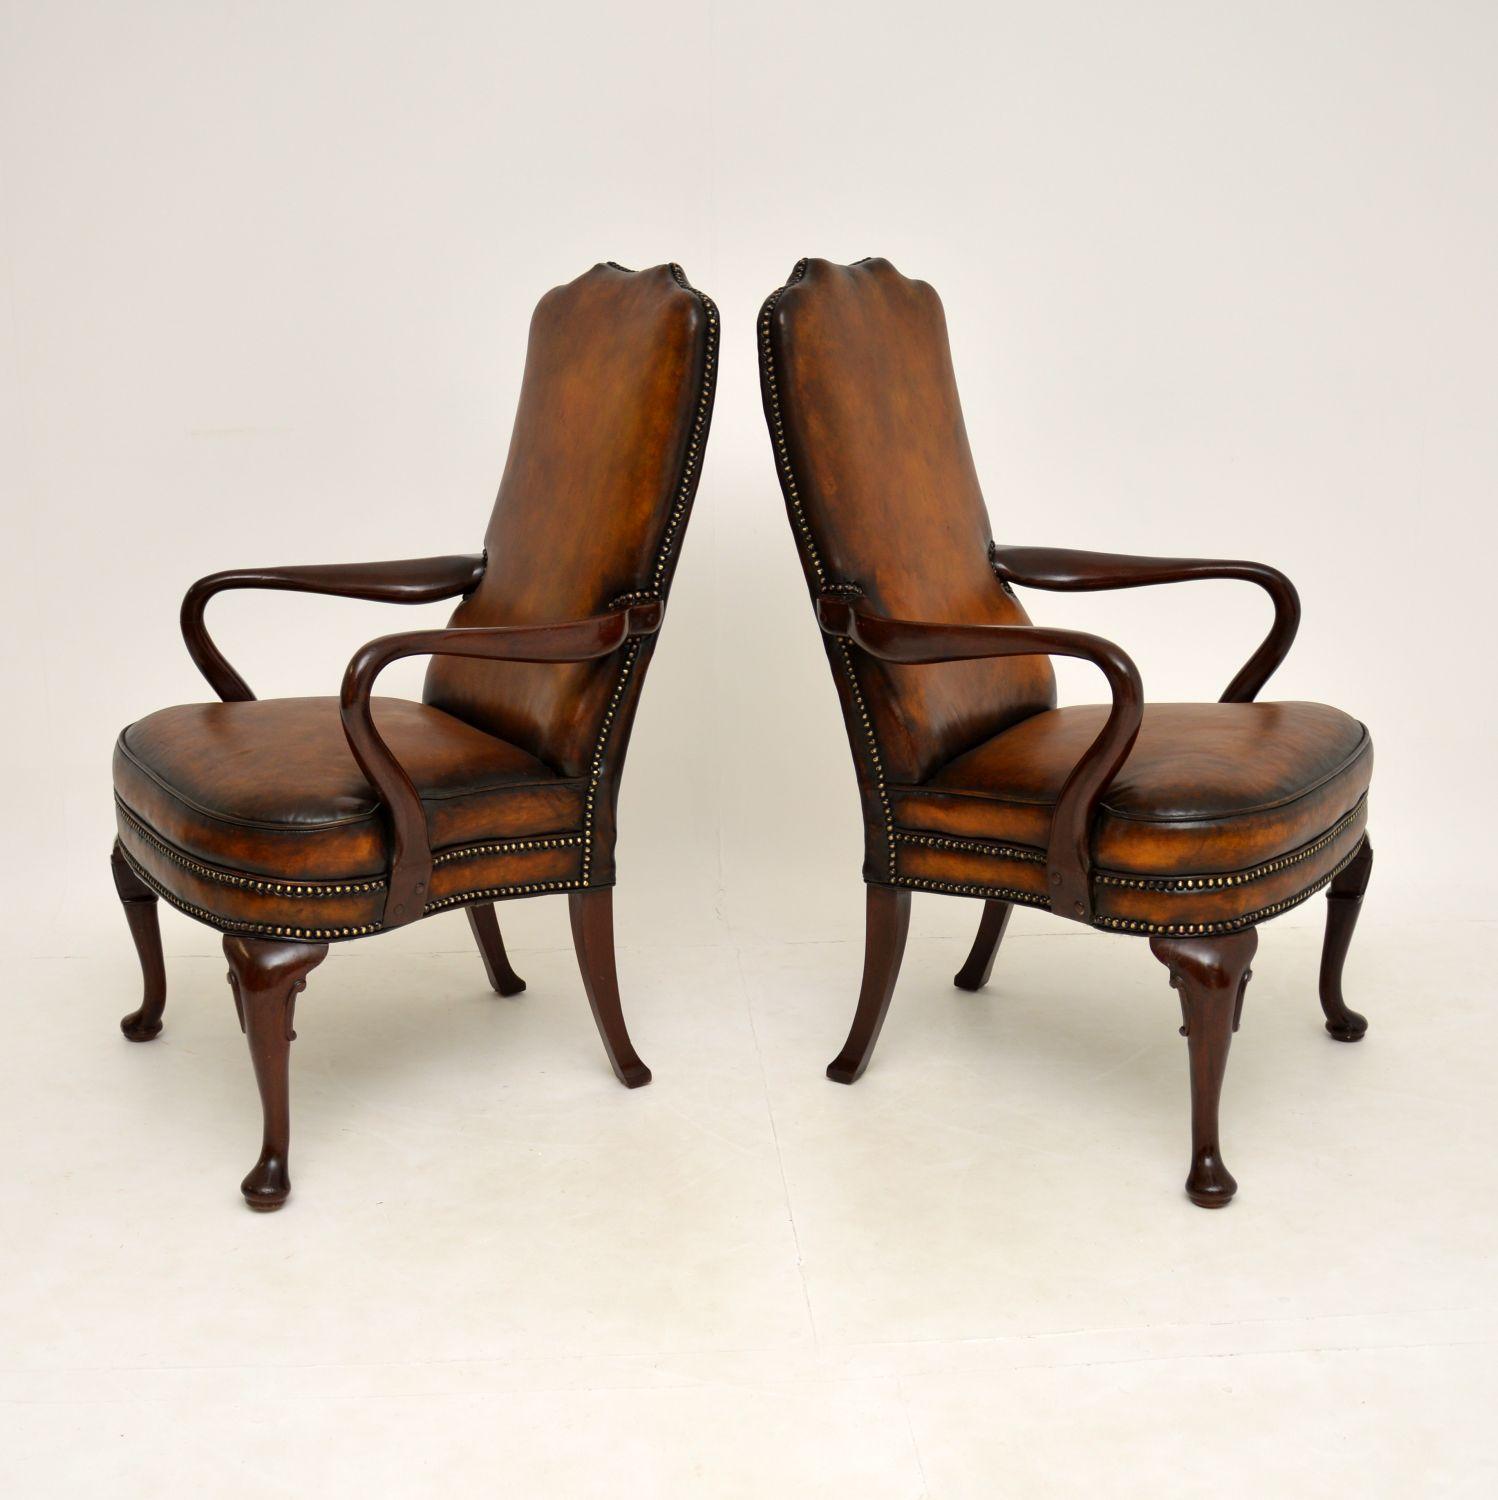 English Pair of Antique Georgian Style Leather & Mahogany Armchairs